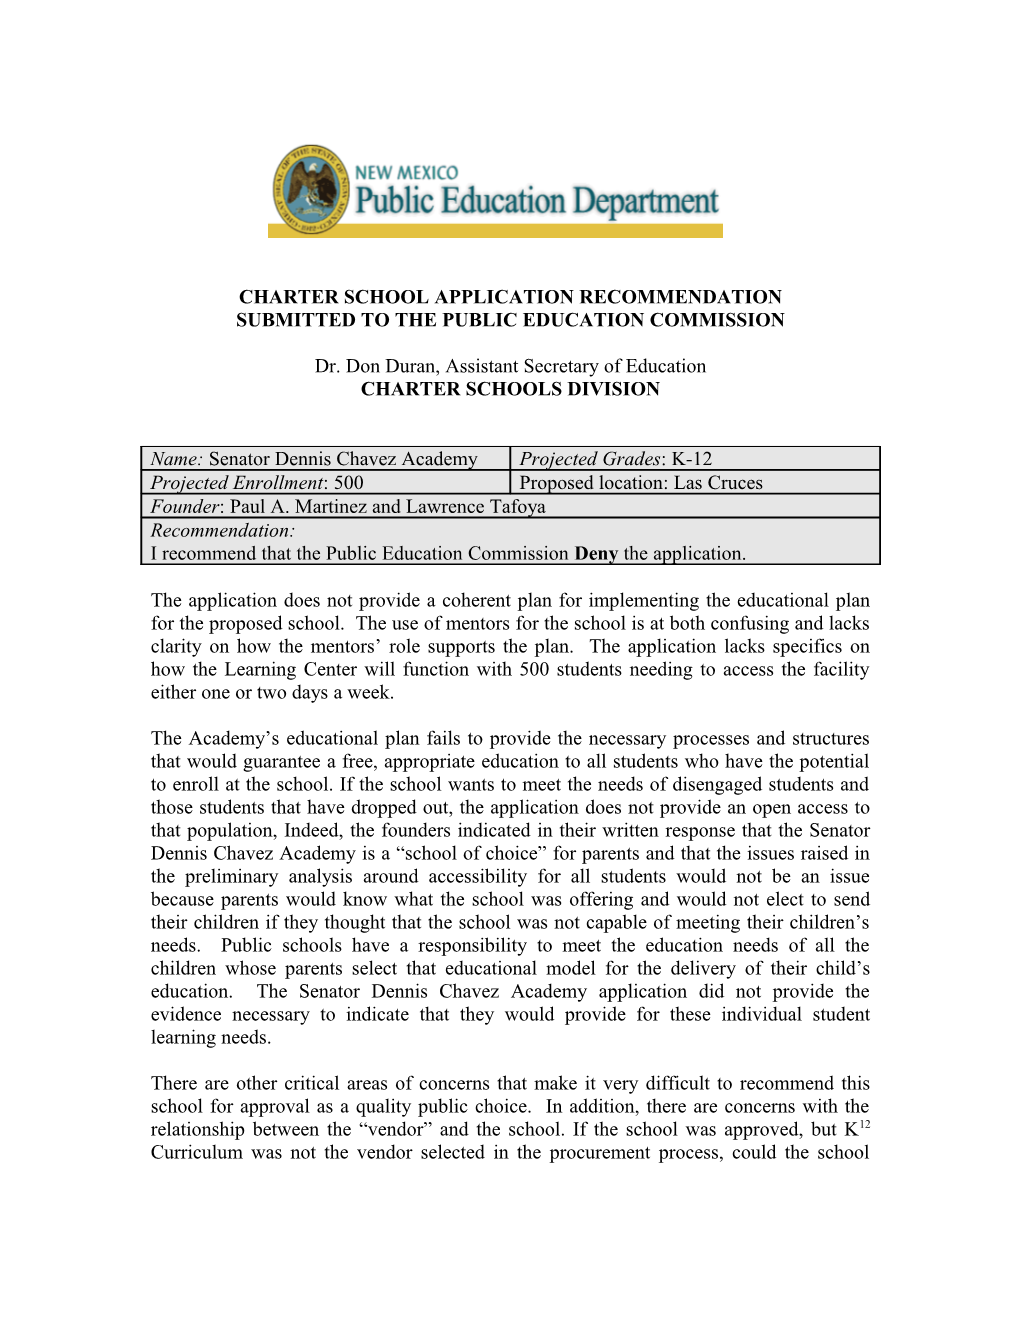 Submitted to the Public Education Commission